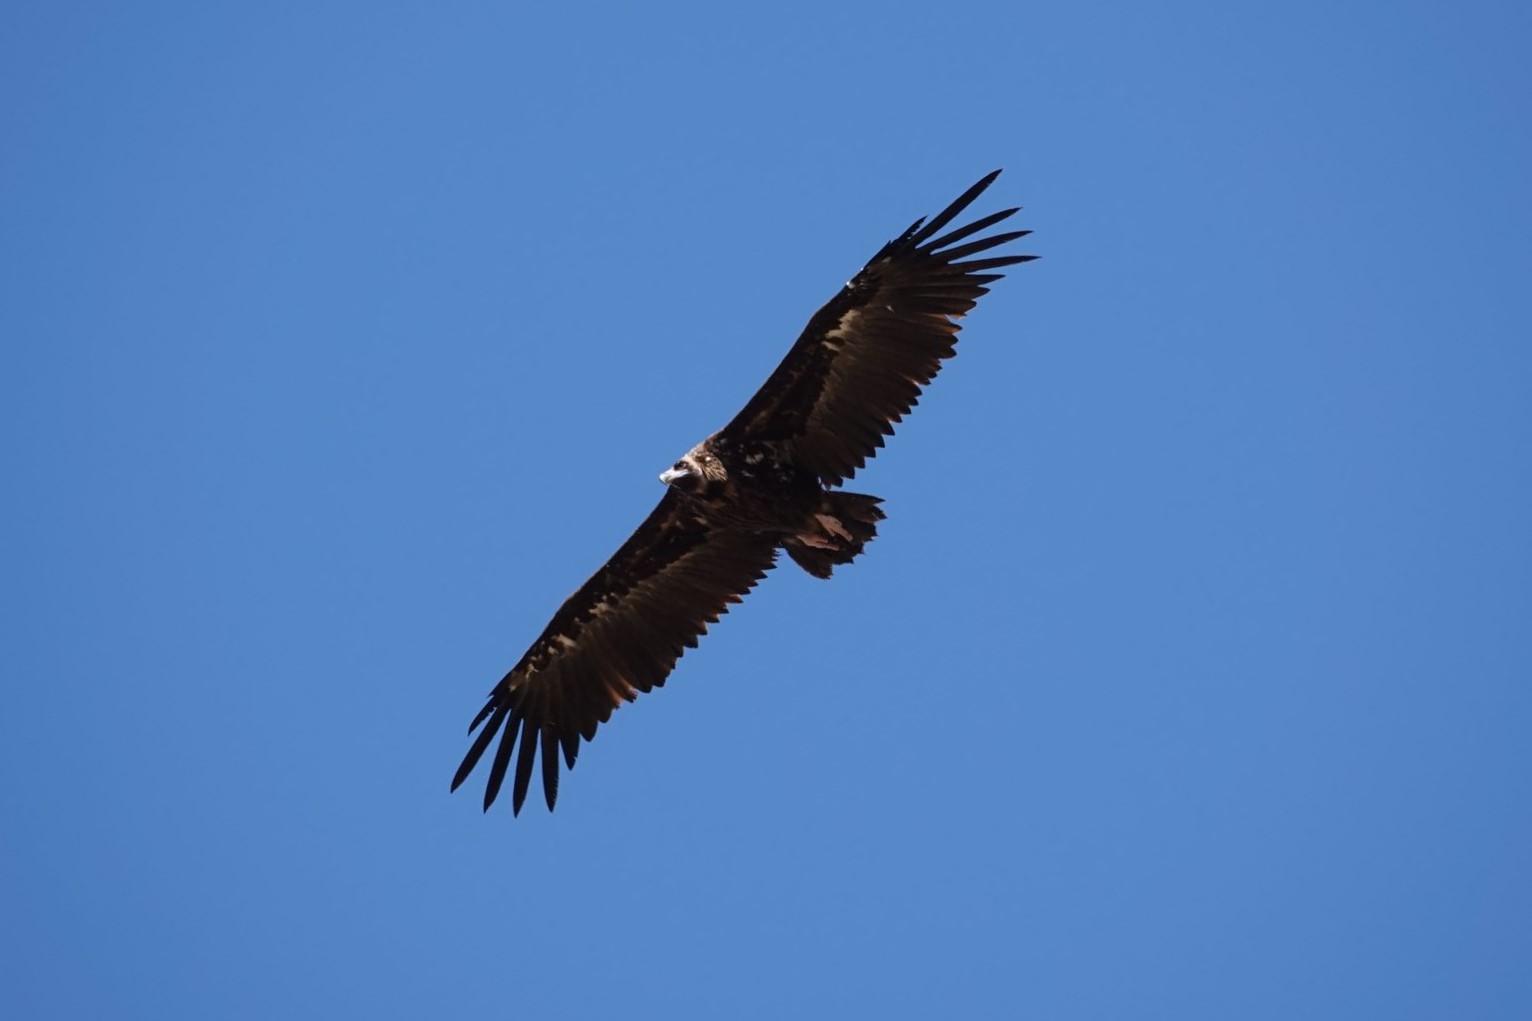 Cinereous Vulture Photo by Bonnie Clarfield-Bylin